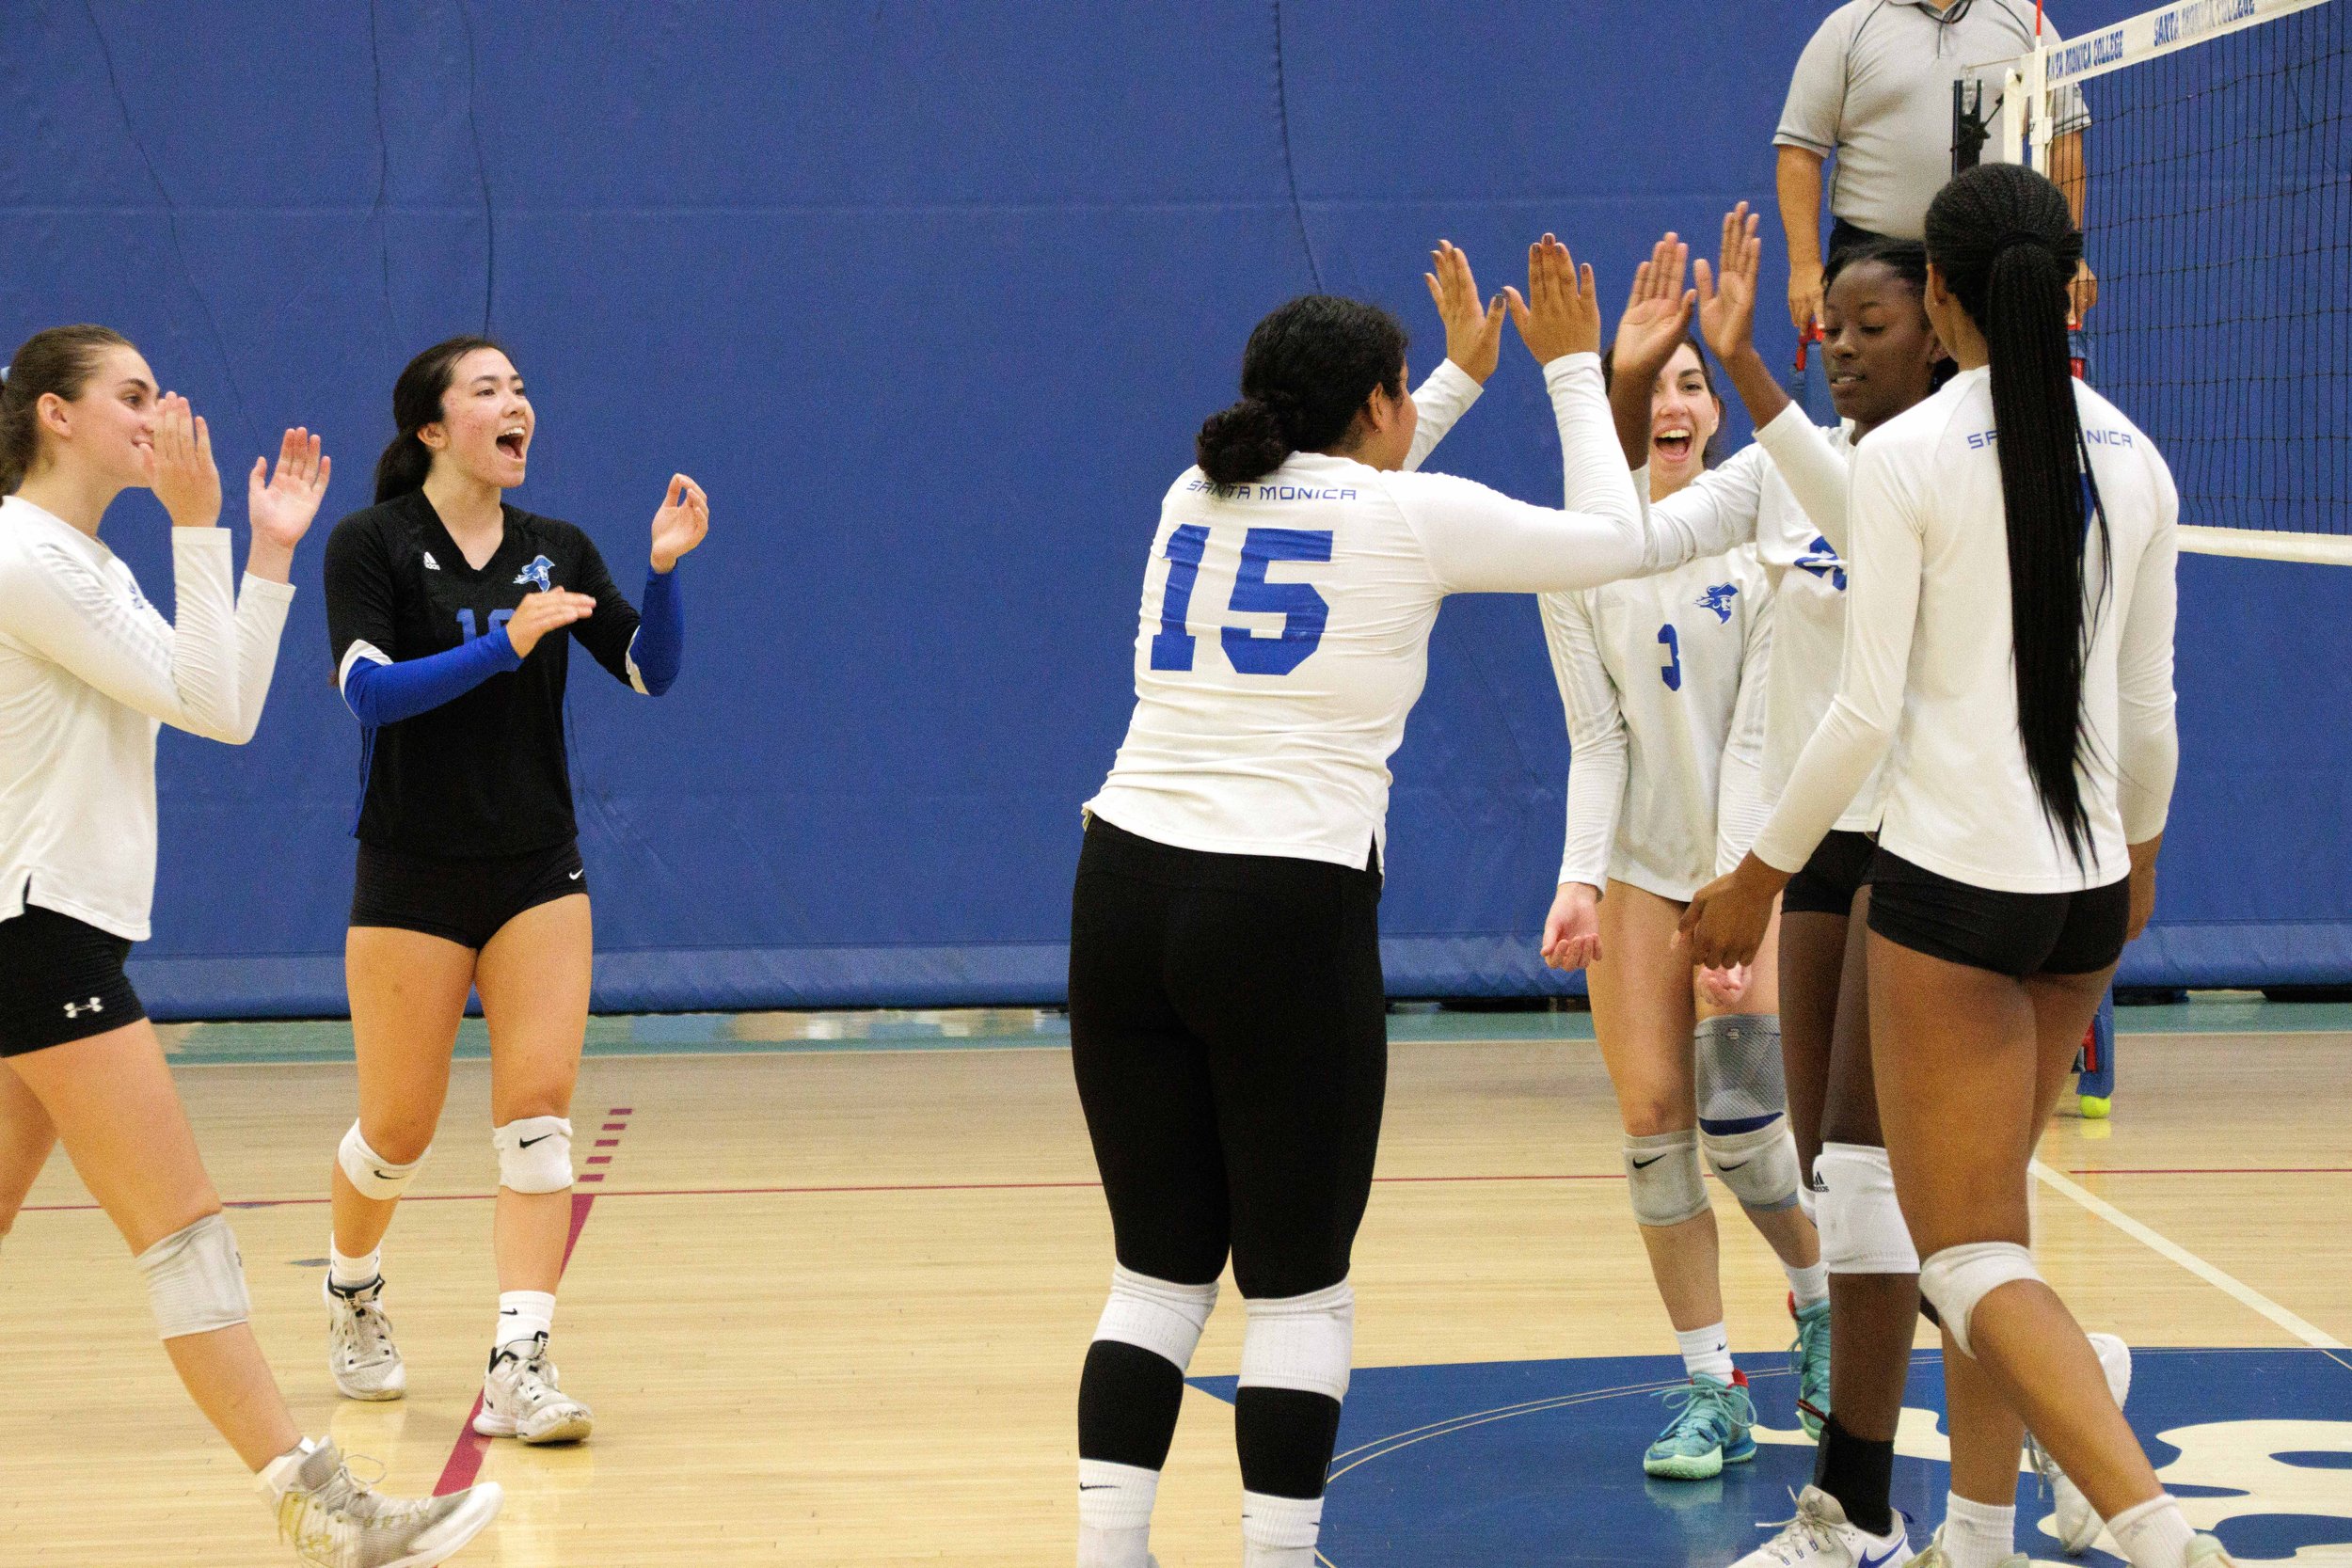  The Santa Monica College (SMC) Women's Volleyball team celebrates as they won a point, bringing their score to 18-14, during a match against San Diego Miramar at the SMC gymnasium, Santa Monica, Calif. Sept. 08, 2023. 